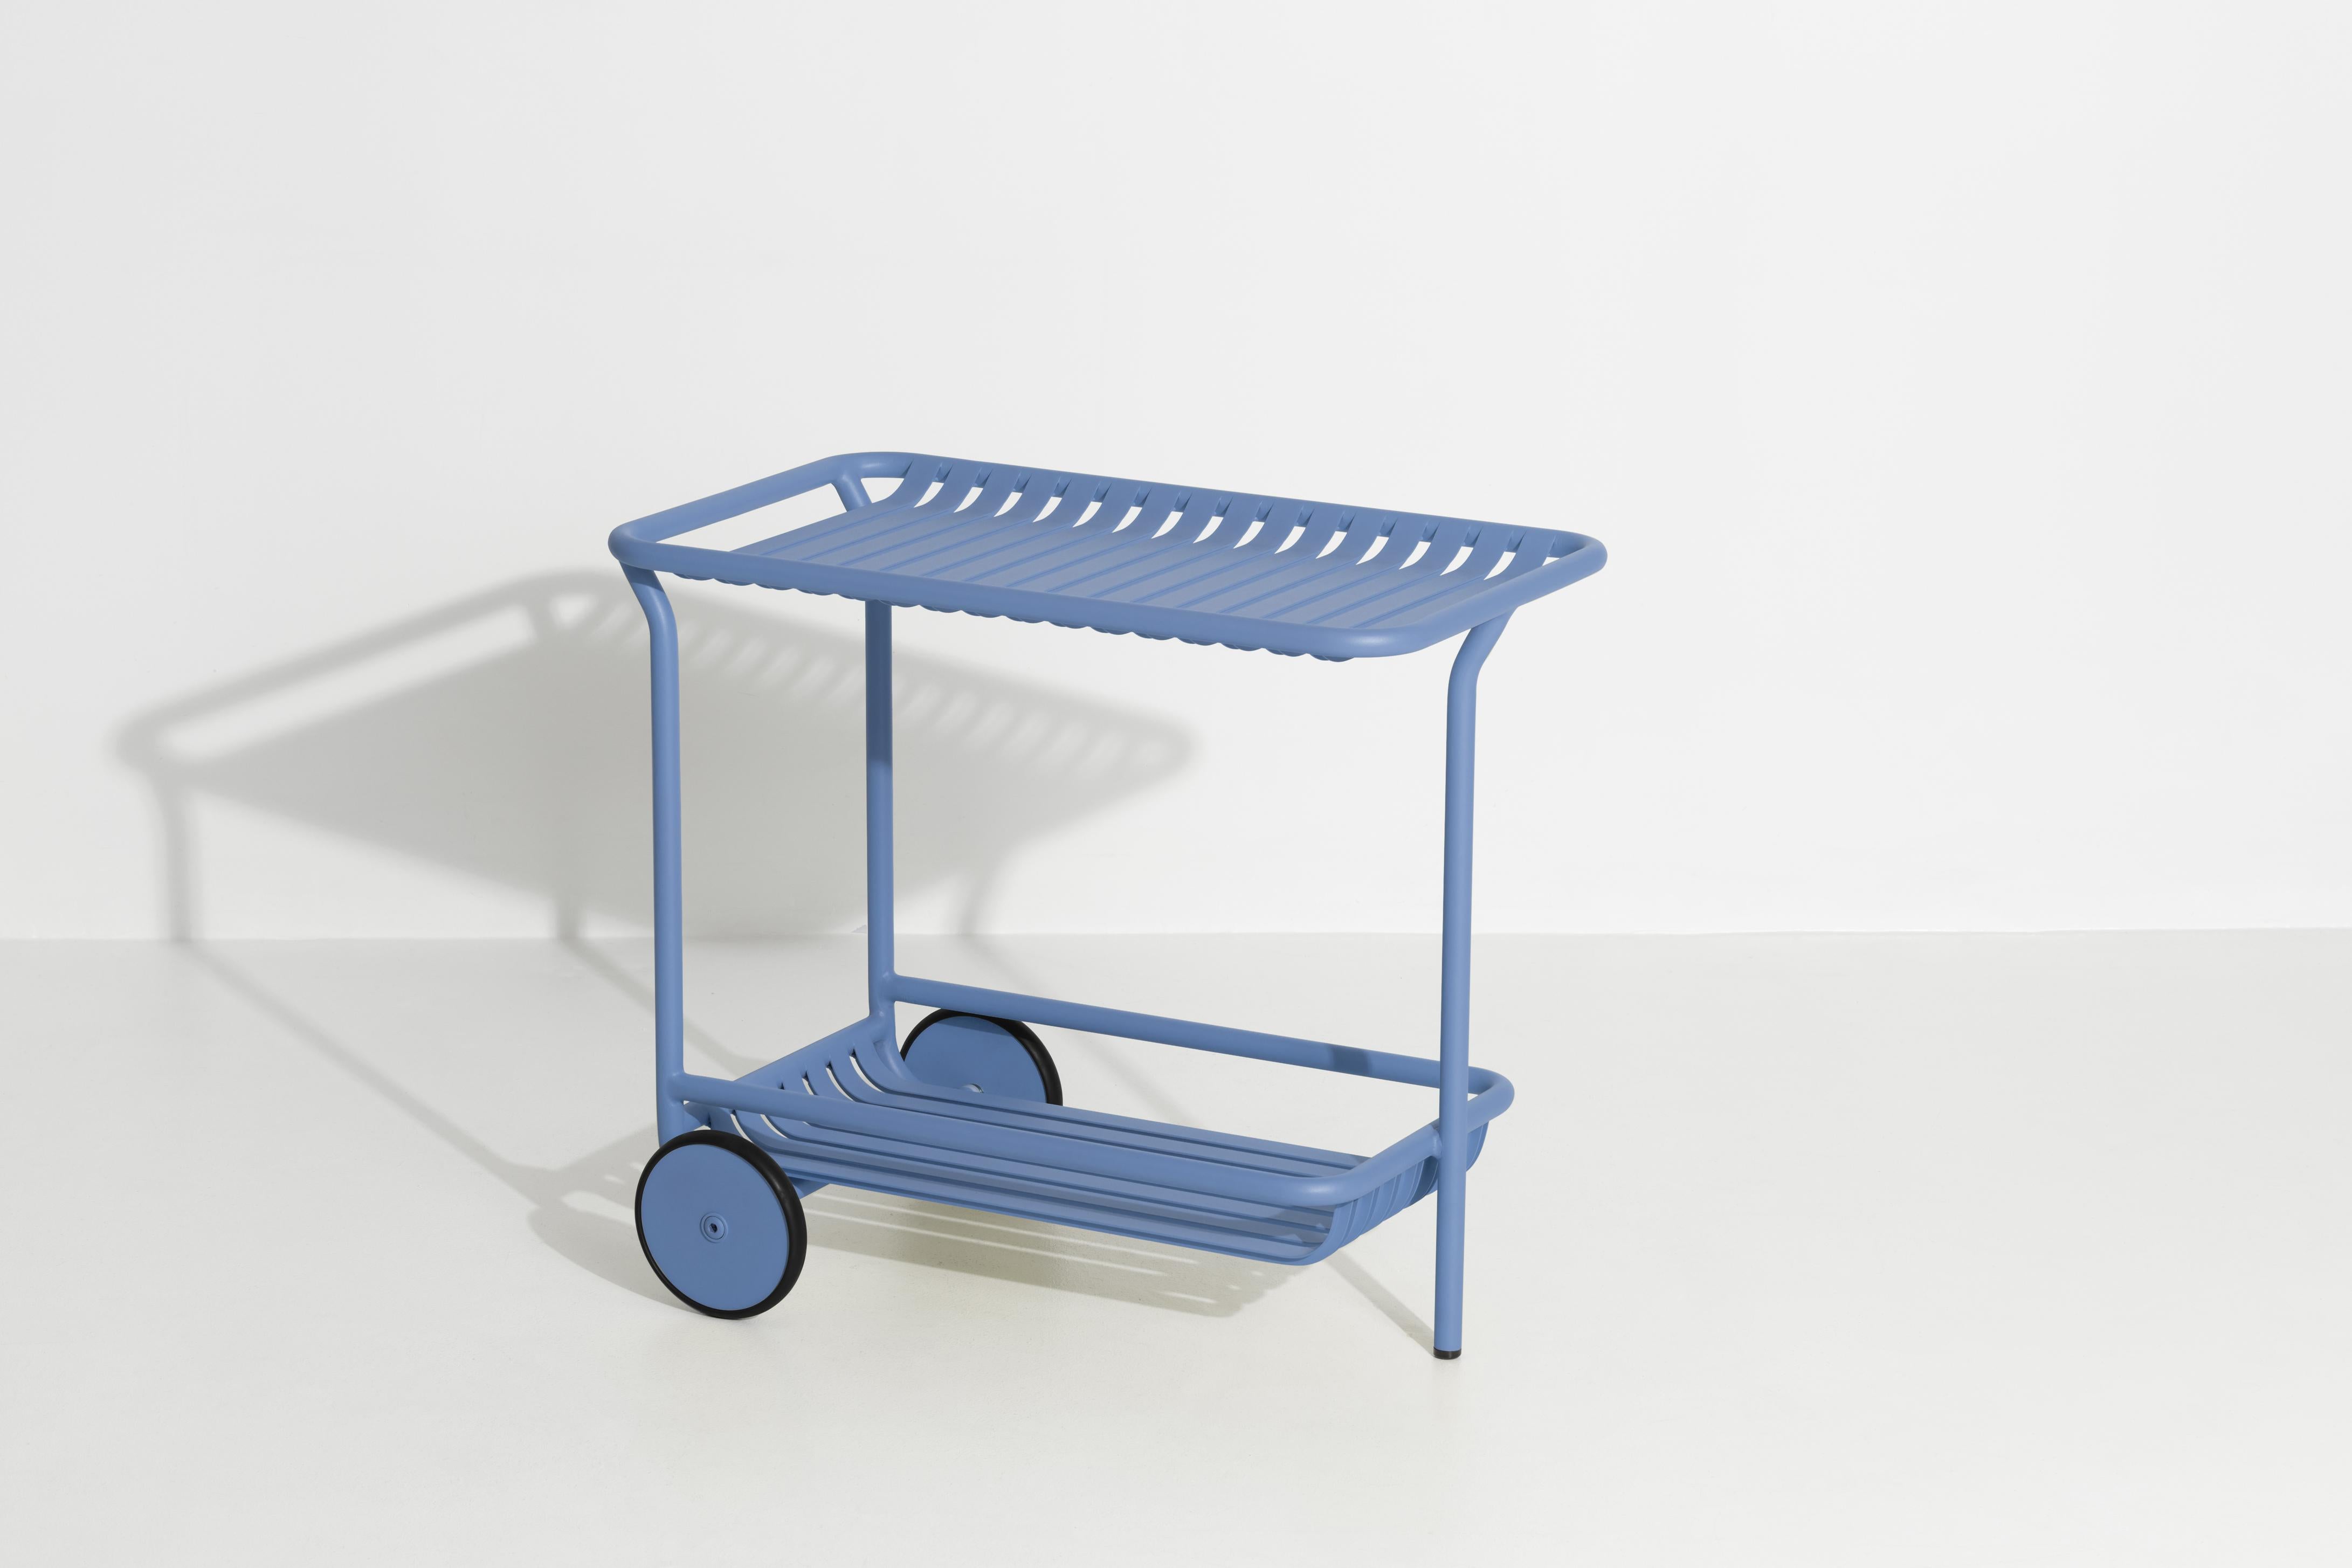 Petite Friture Week-End Trolley in Azur Blue Aluminium by Studio BrichetZiegler, 2017

The week-end collection is a full range of outdoor furniture, in aluminium grained epoxy paint, matt finish, that includes 18 functions and 8 colours for the